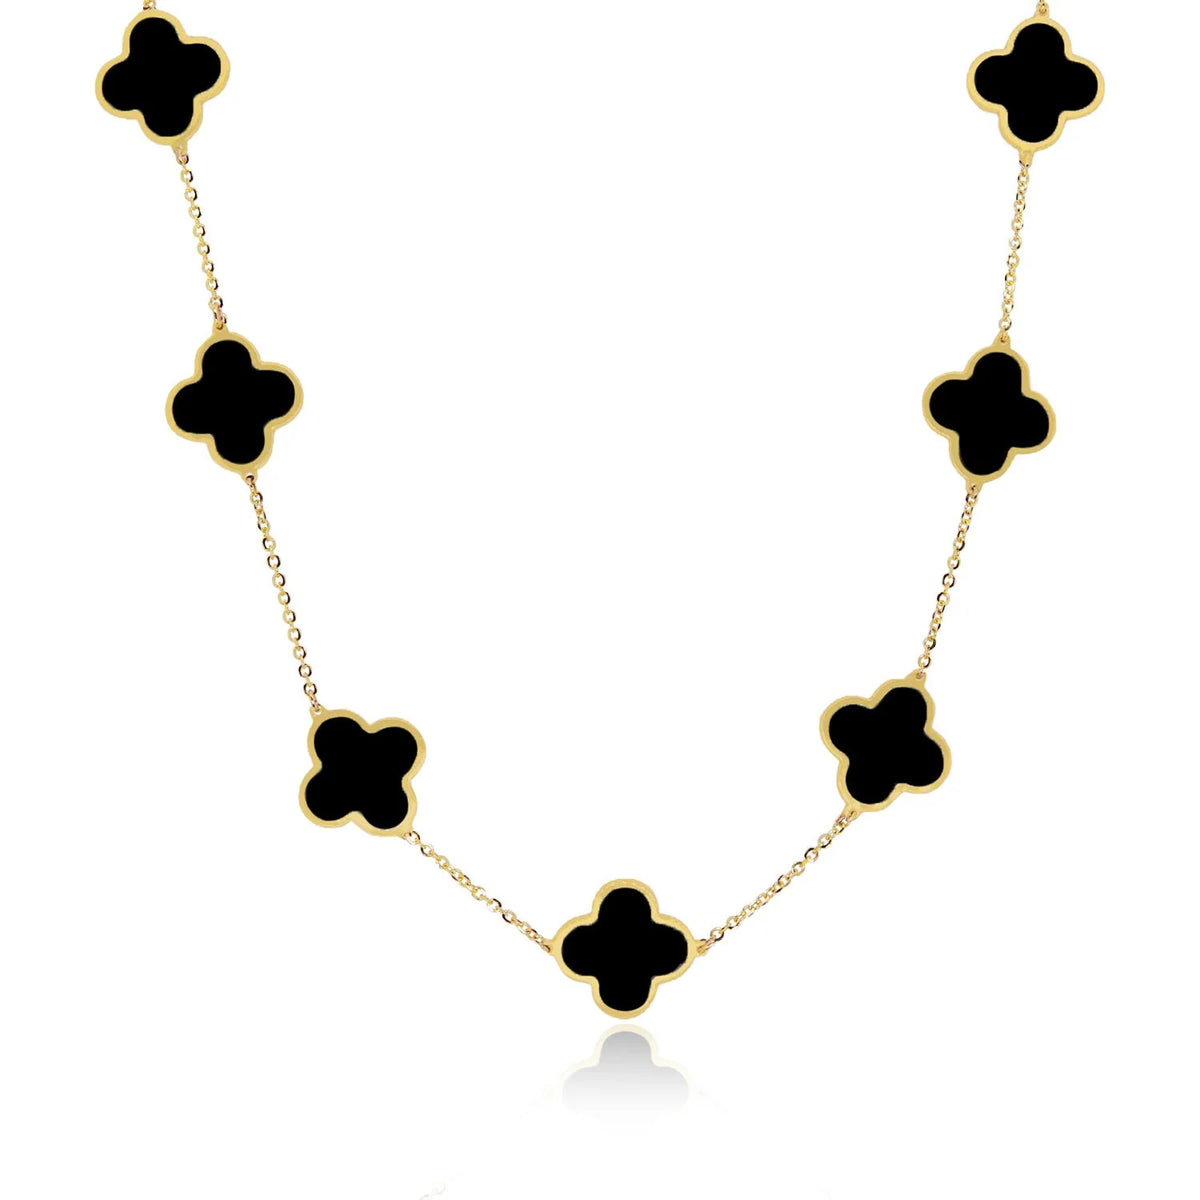 Necklace | Quatrefoil Stainless Steel Station Necklace